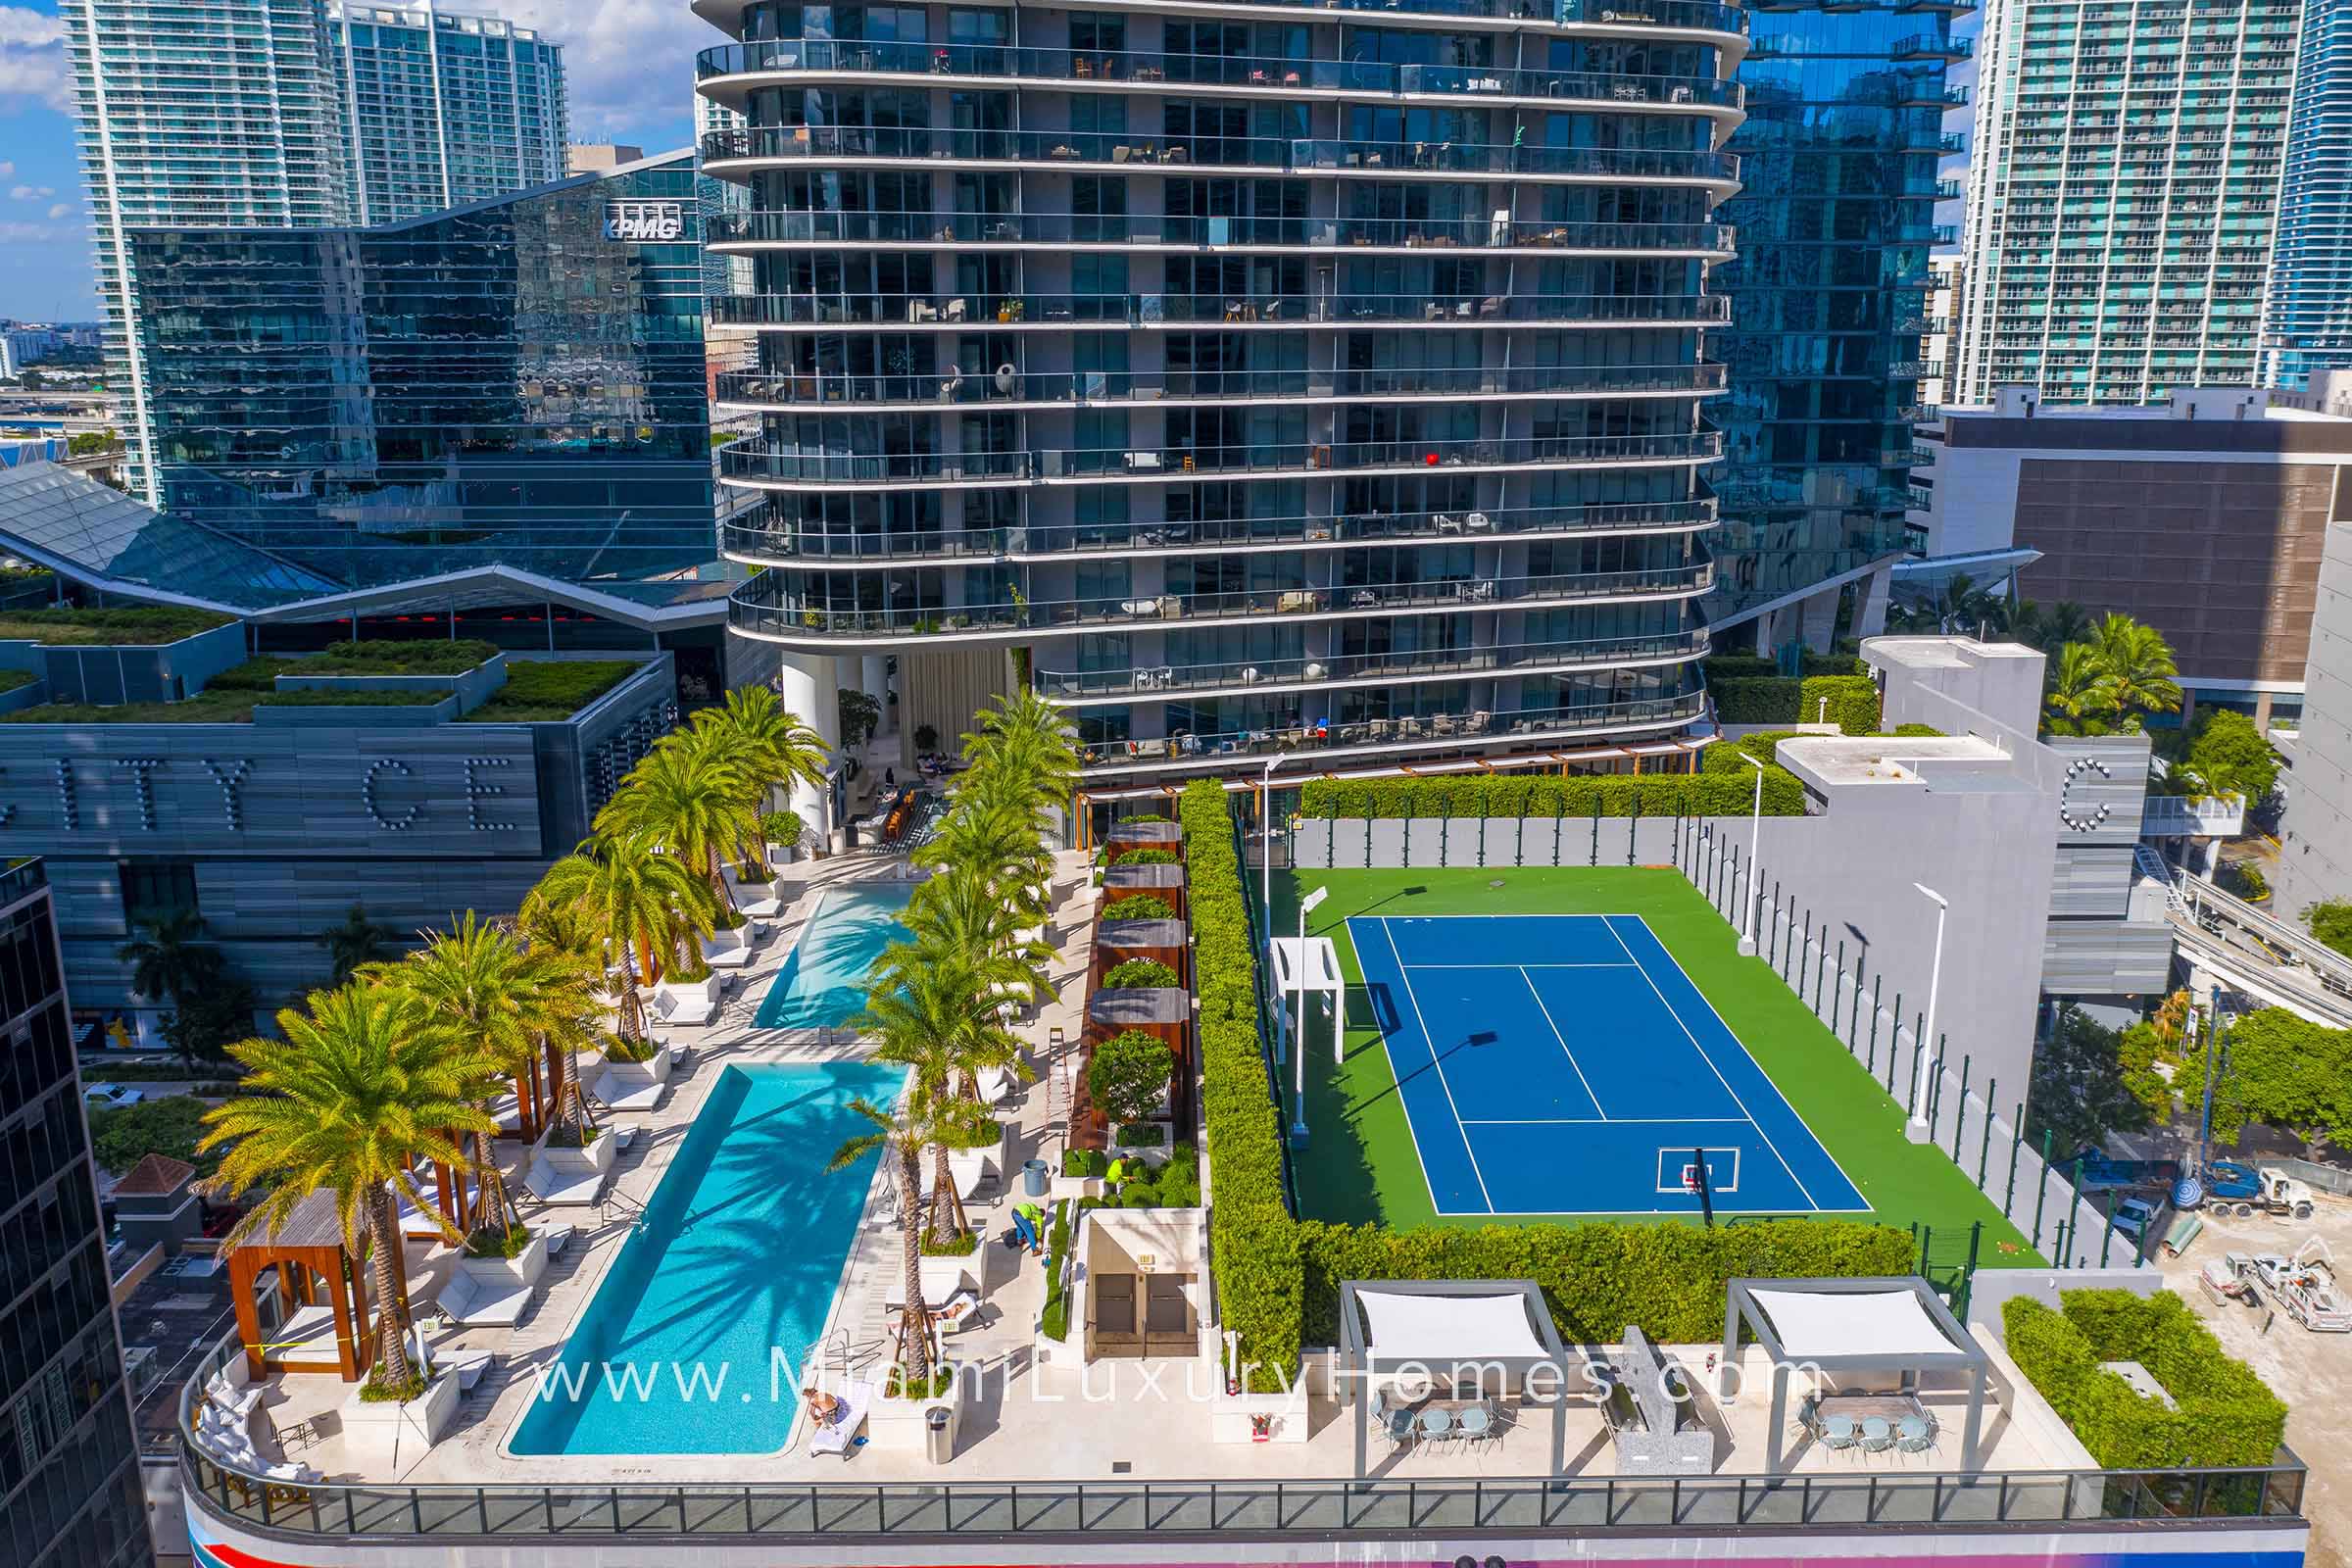 SLS Lux Pool and Tennis Court